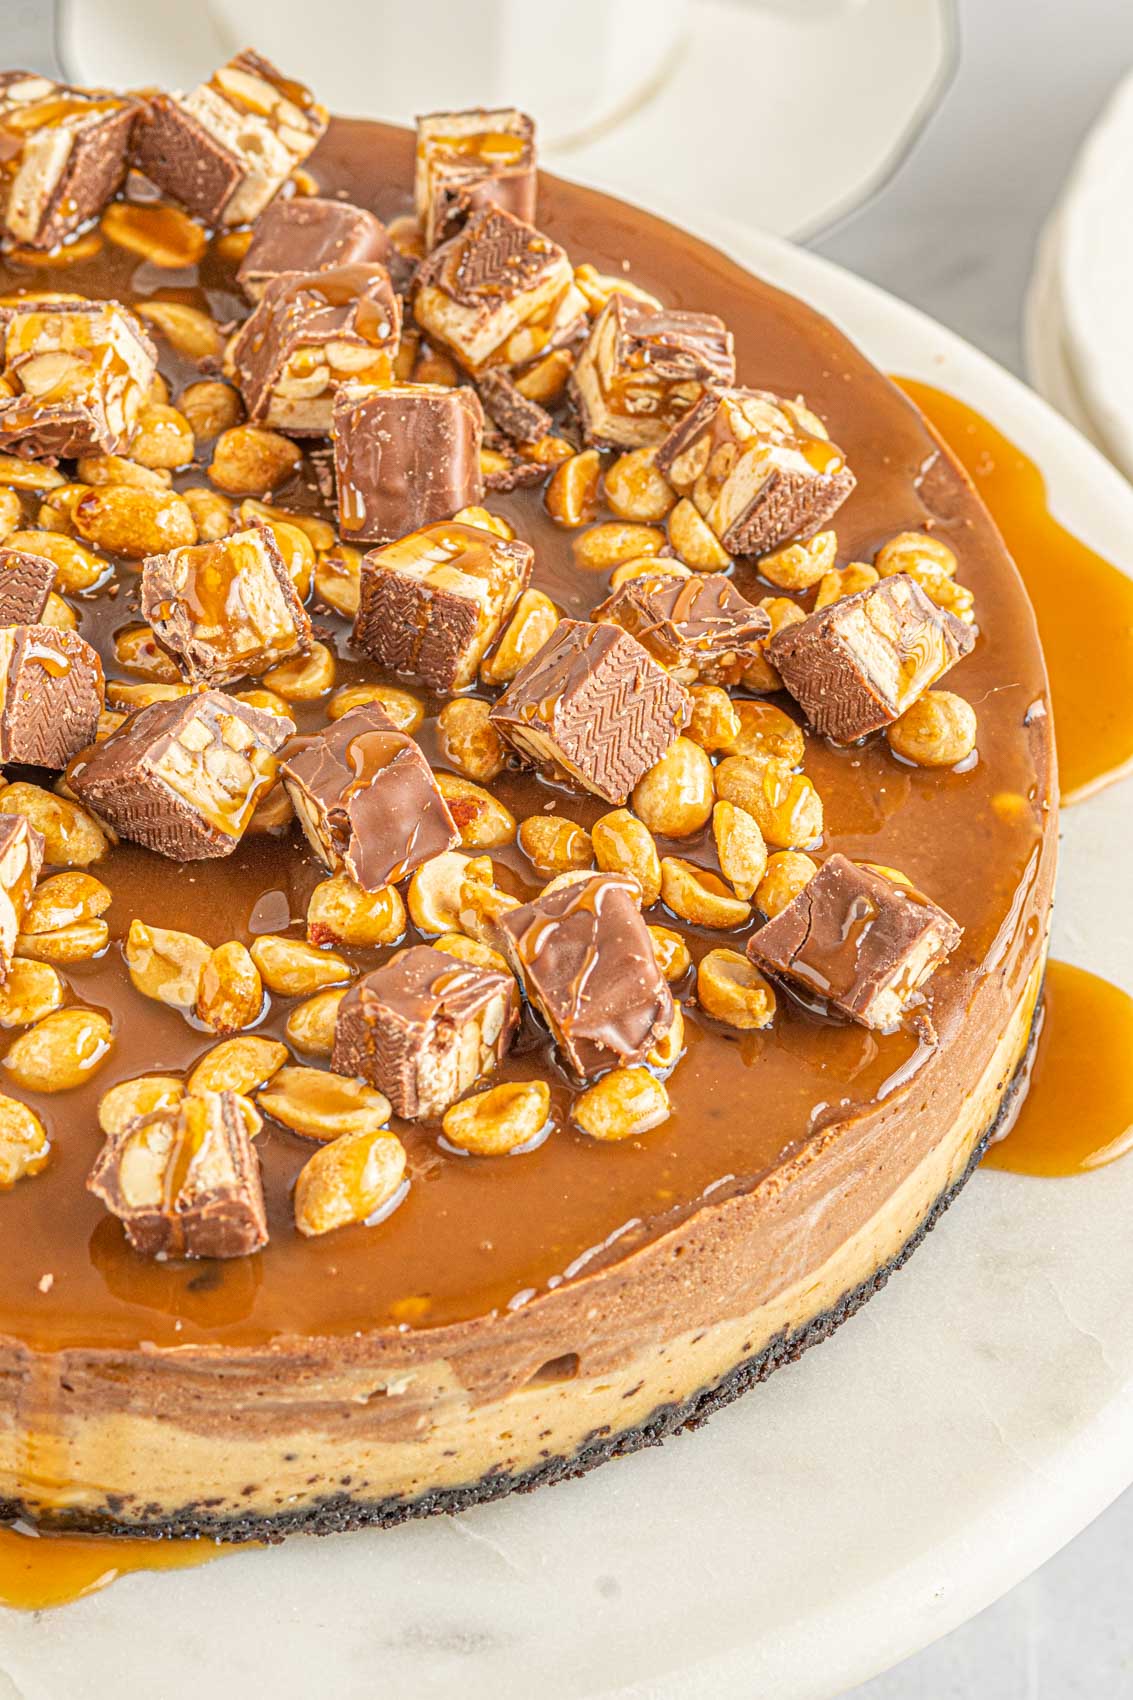 top of a Snickers cheesecake, showing the chopped Snickers bars and caramel peanut topping